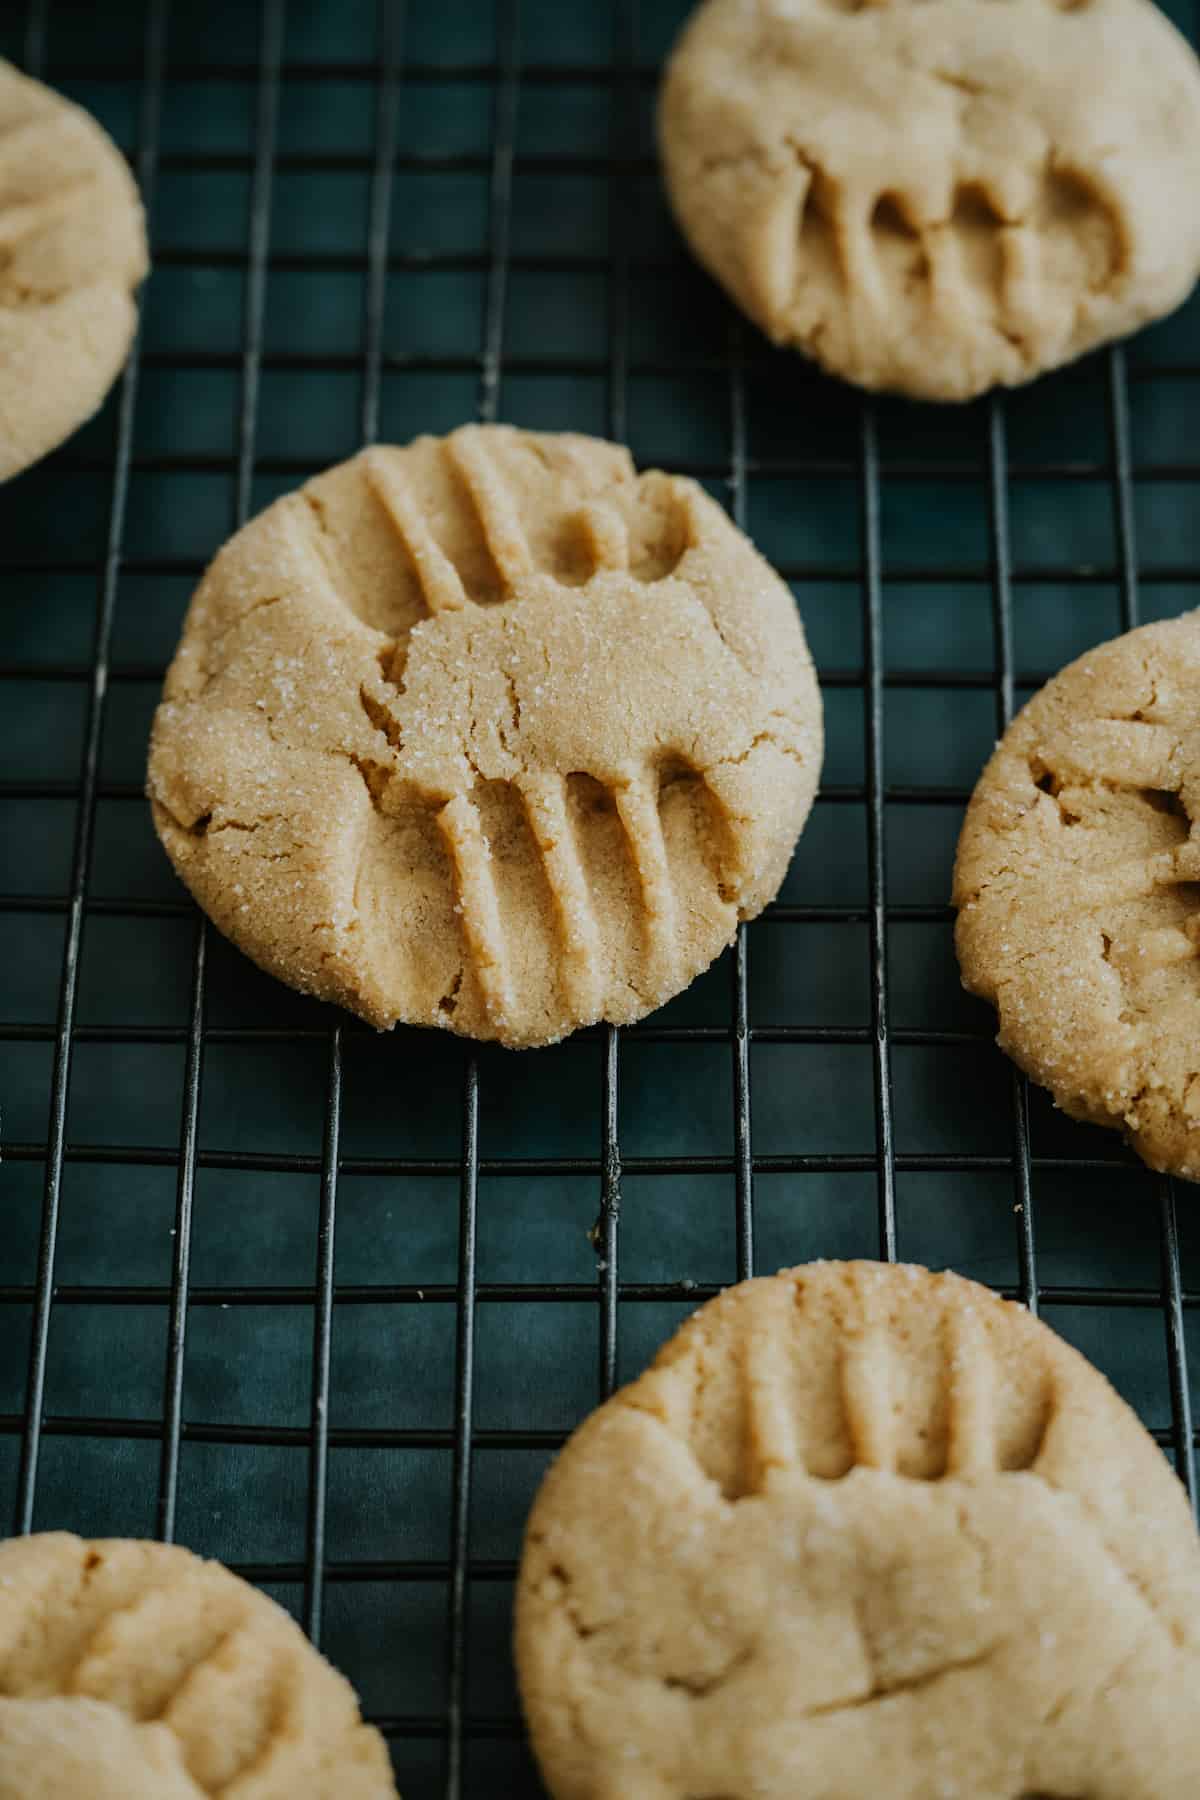 baked peanut butter cookies cooling on a rack before adding cajeta.